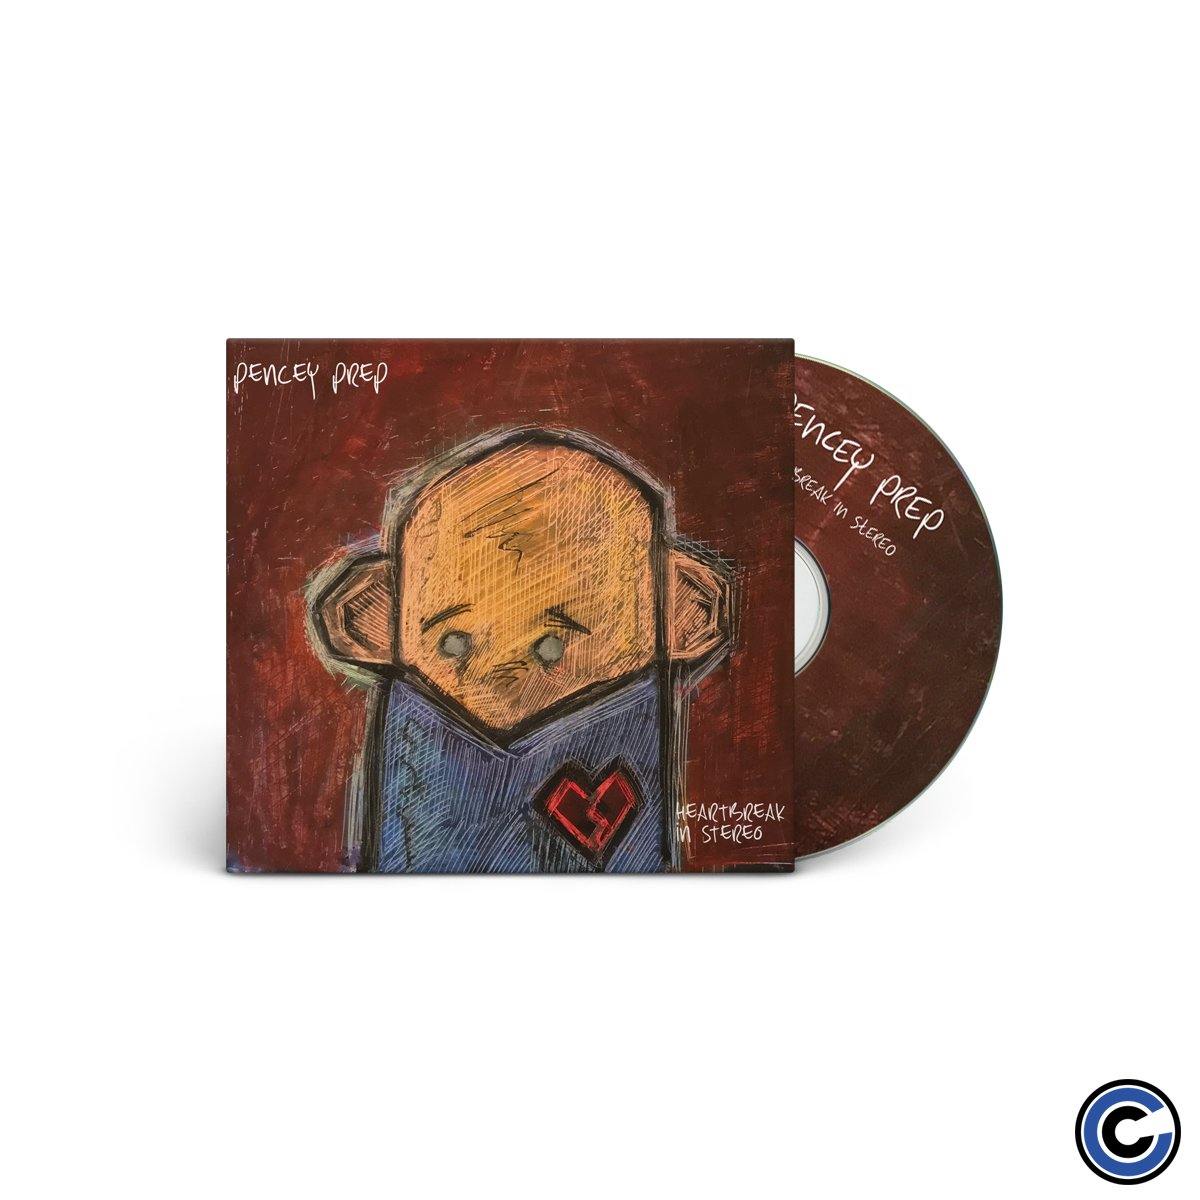 Buy – Pencey Prep "Heartbreak In Stereo" CD – Band & Music Merch – Cold Cuts Merch